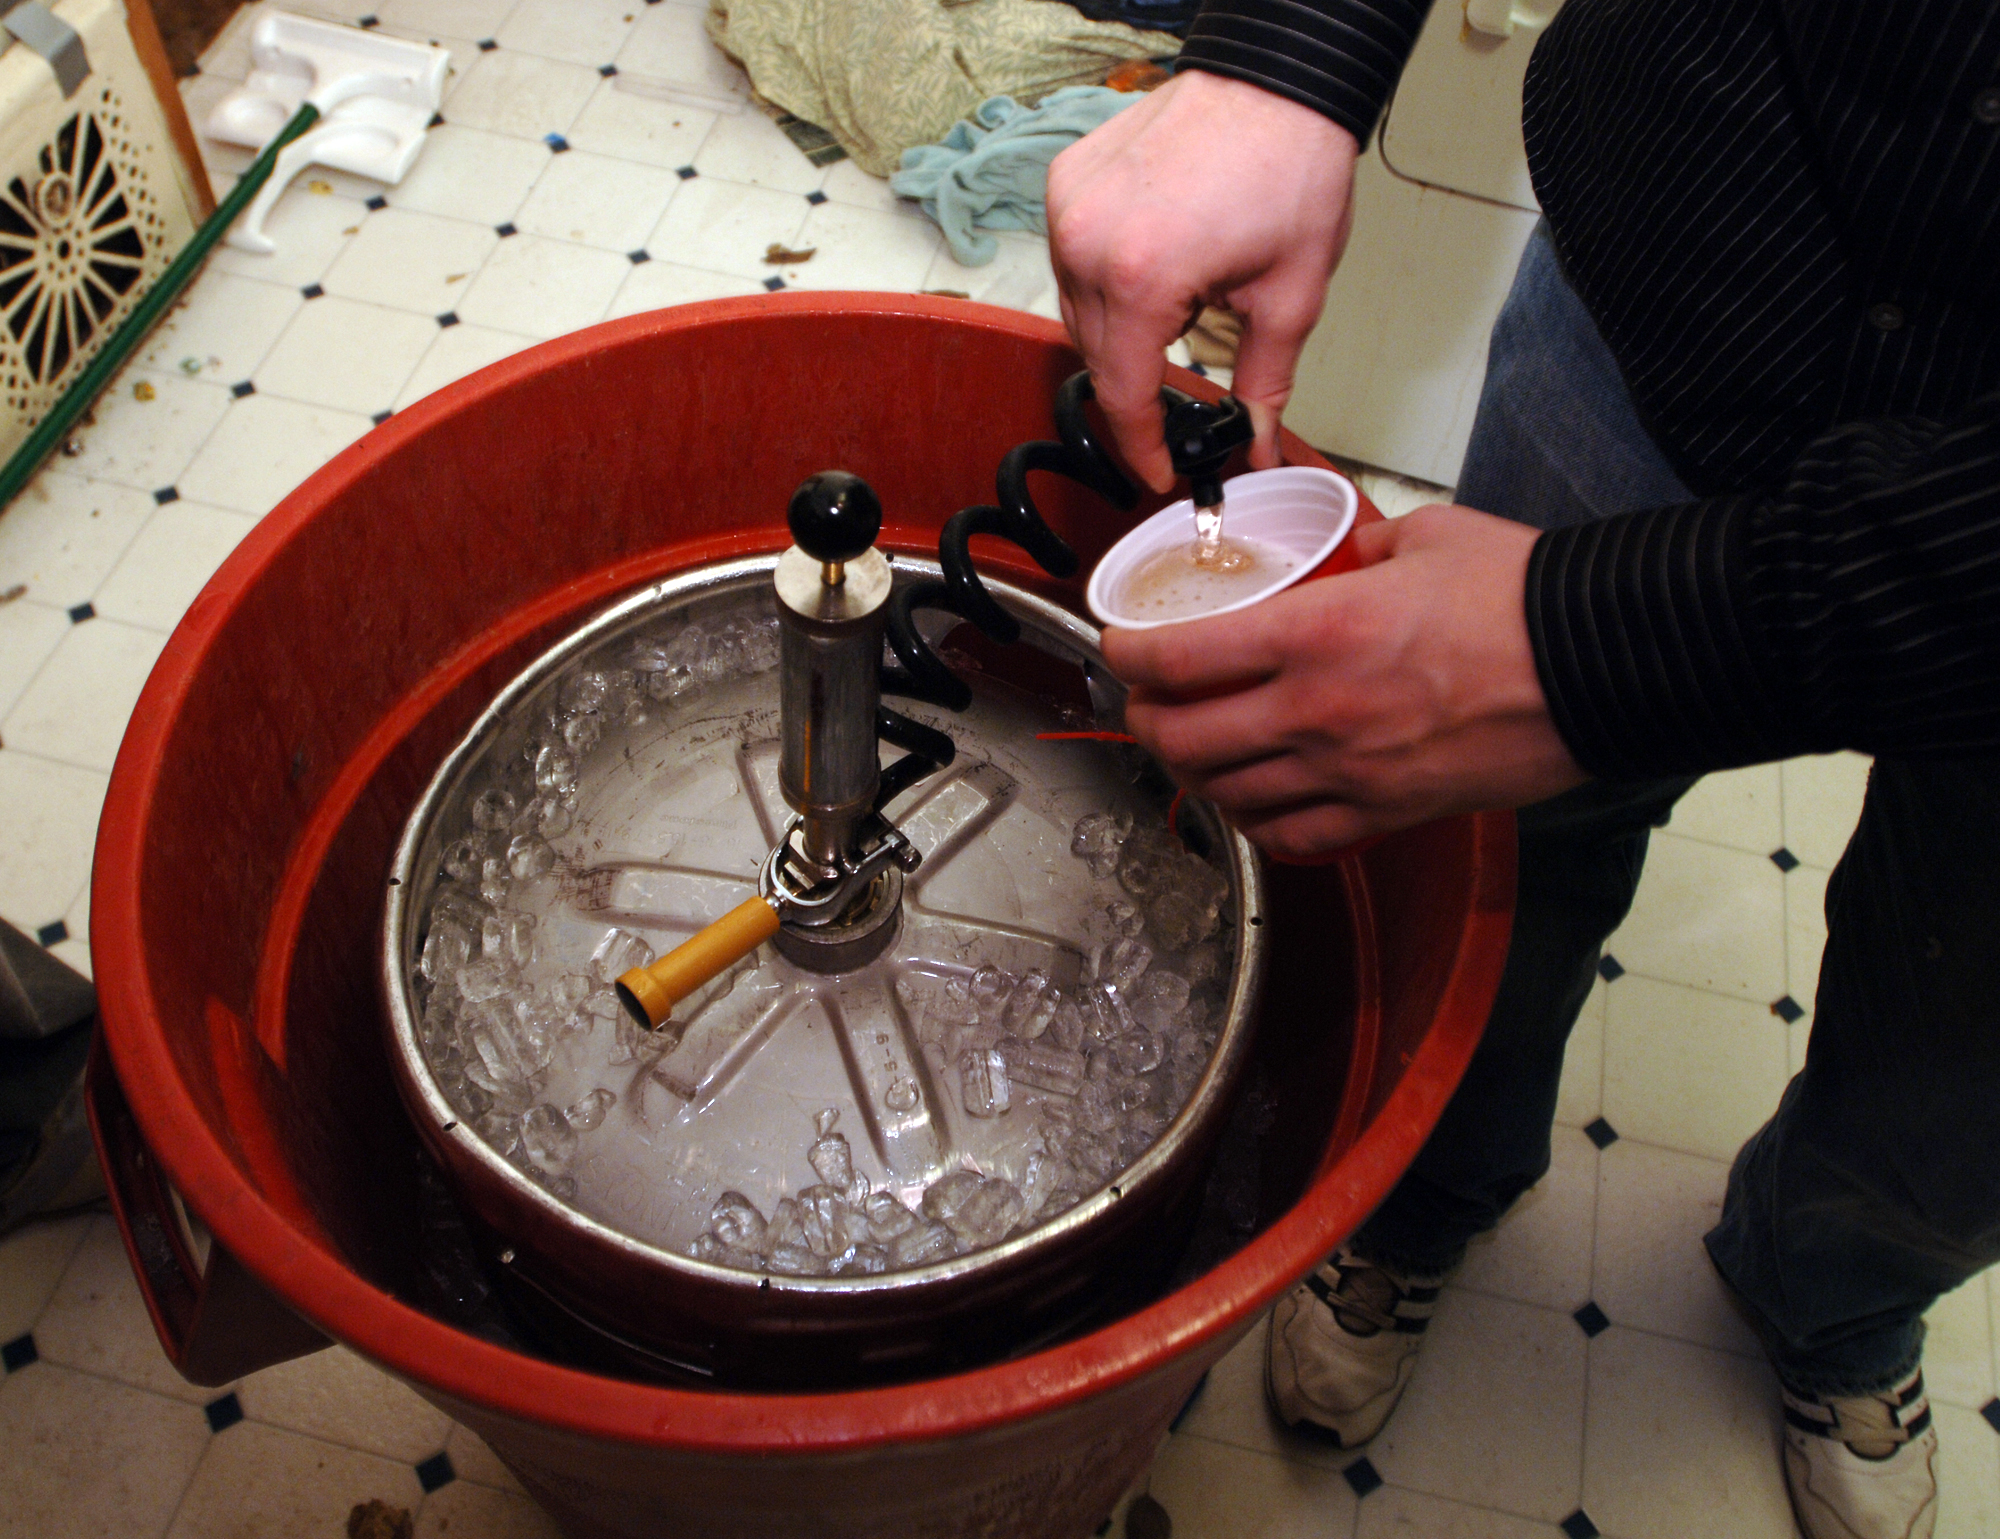 A plastic cup is filled with beer from a keg